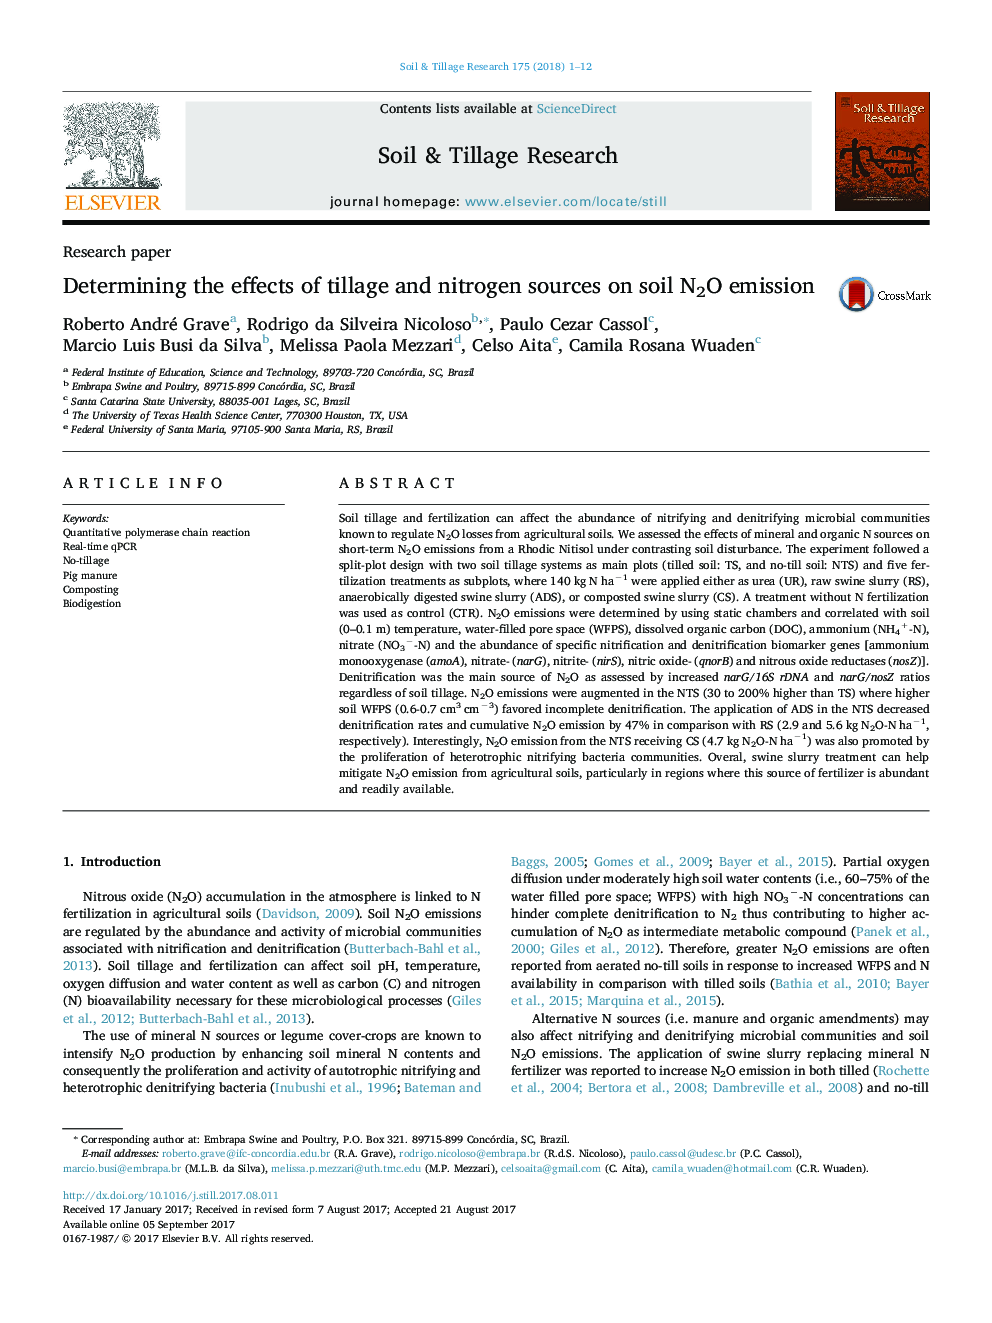 Research paperDetermining the effects of tillage and nitrogen sources on soil N2O emission